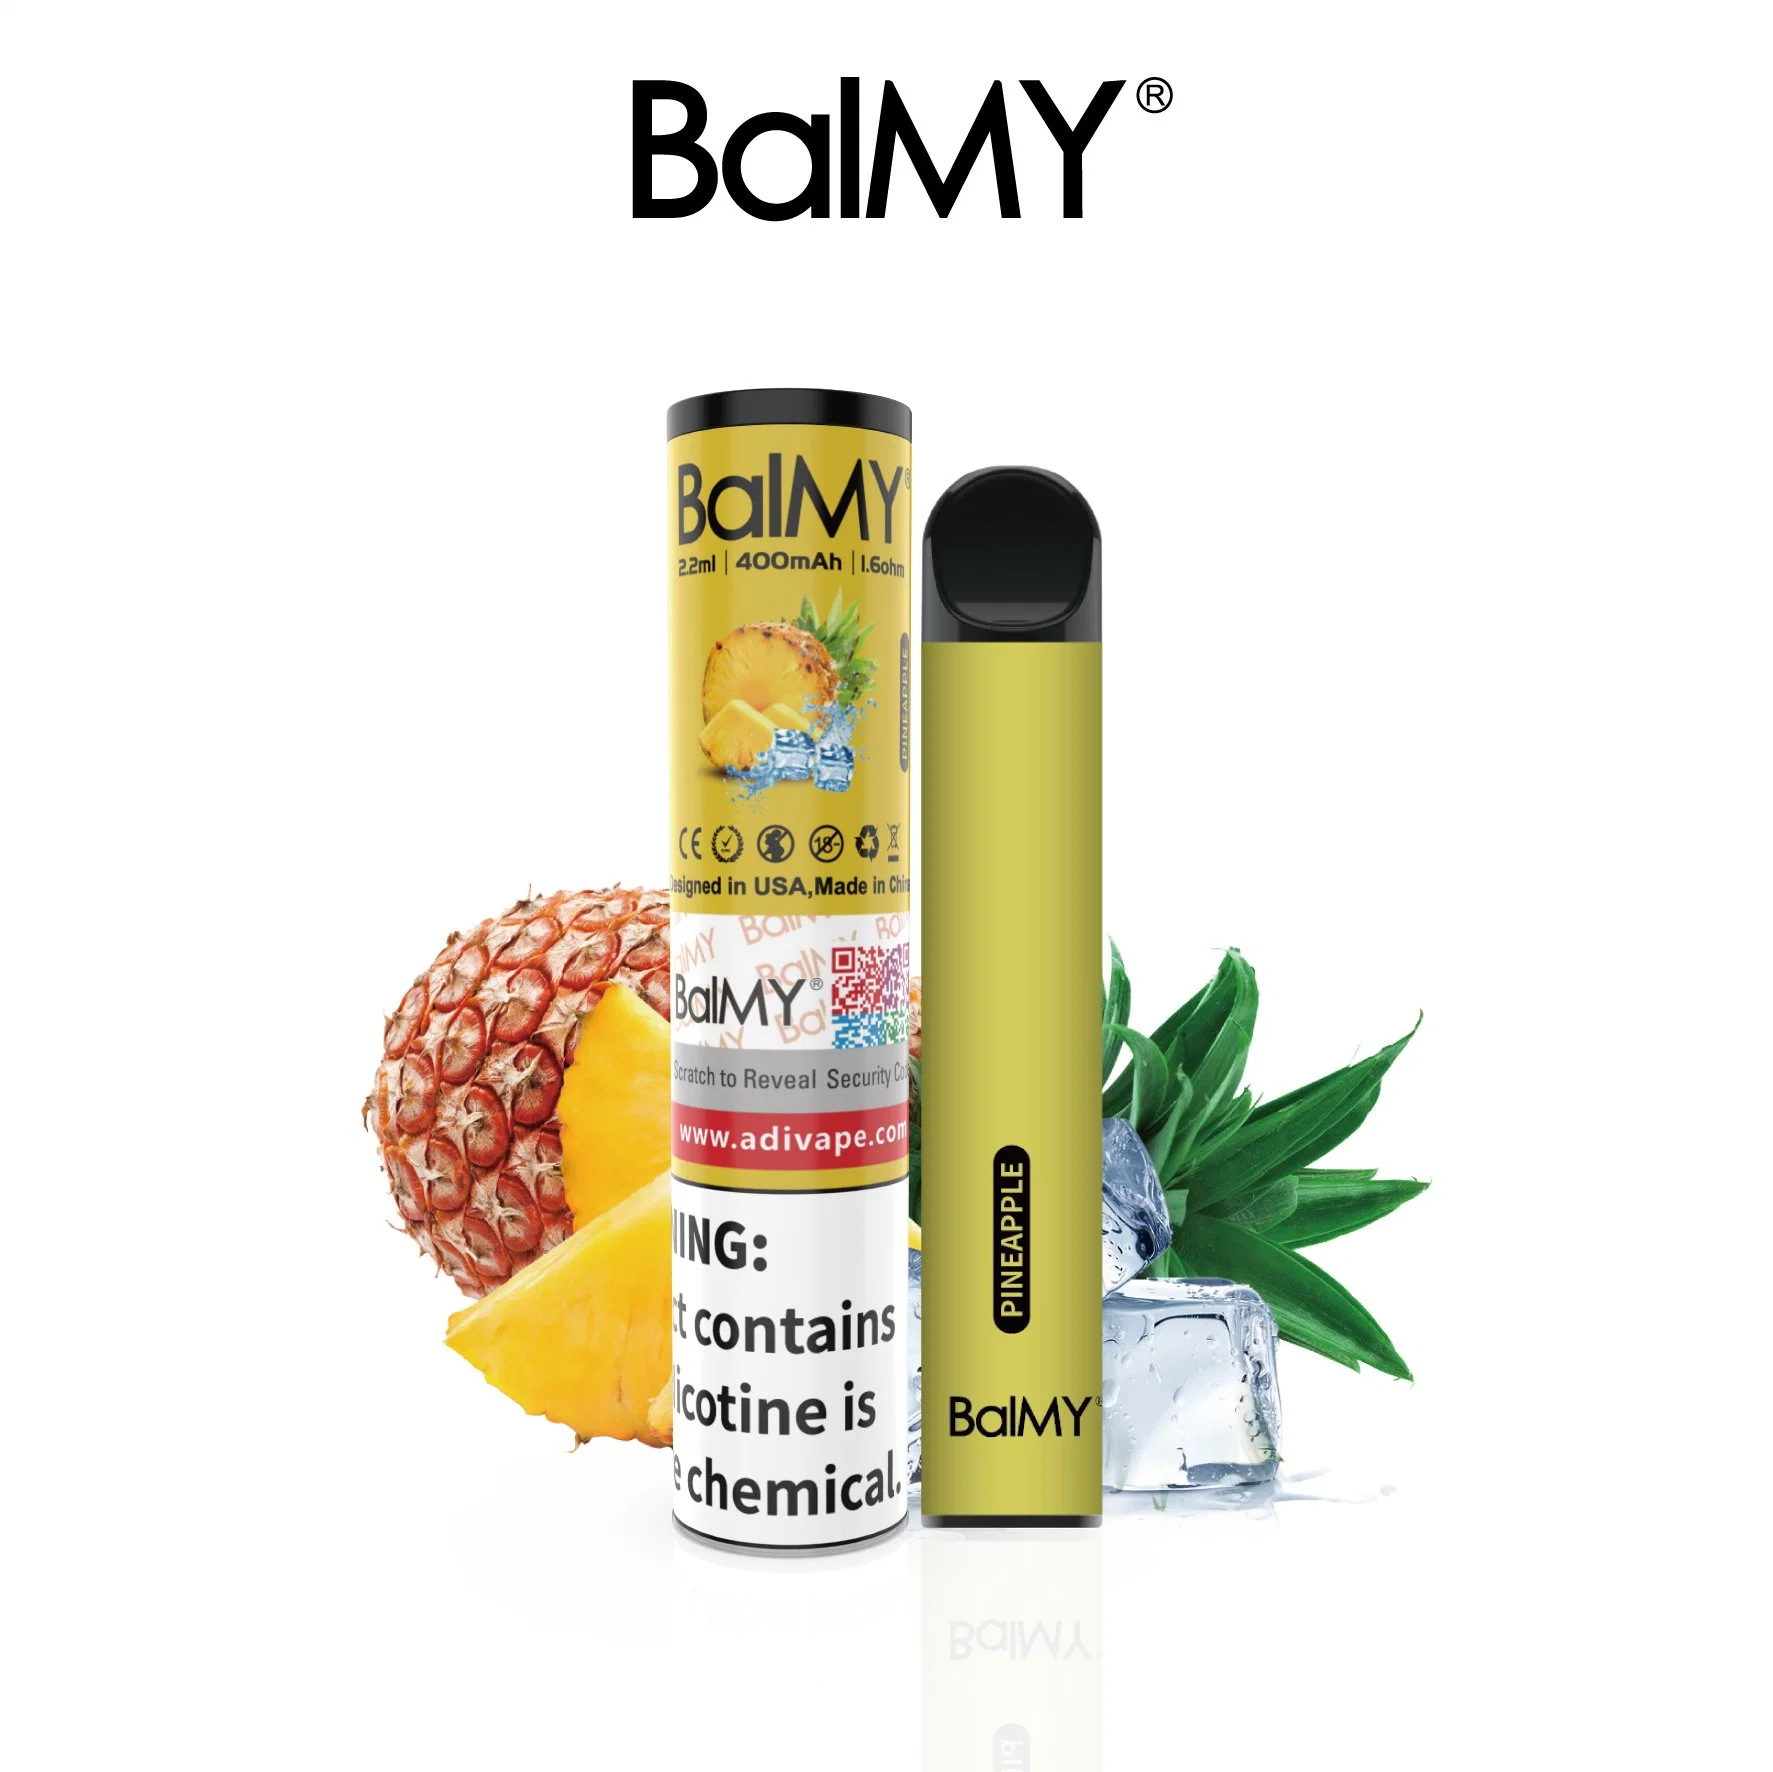 Balmy Disposable E-Cigarettes Are Available in Different Flavors Such as Menthol, Tobacco and Other Good Flavors